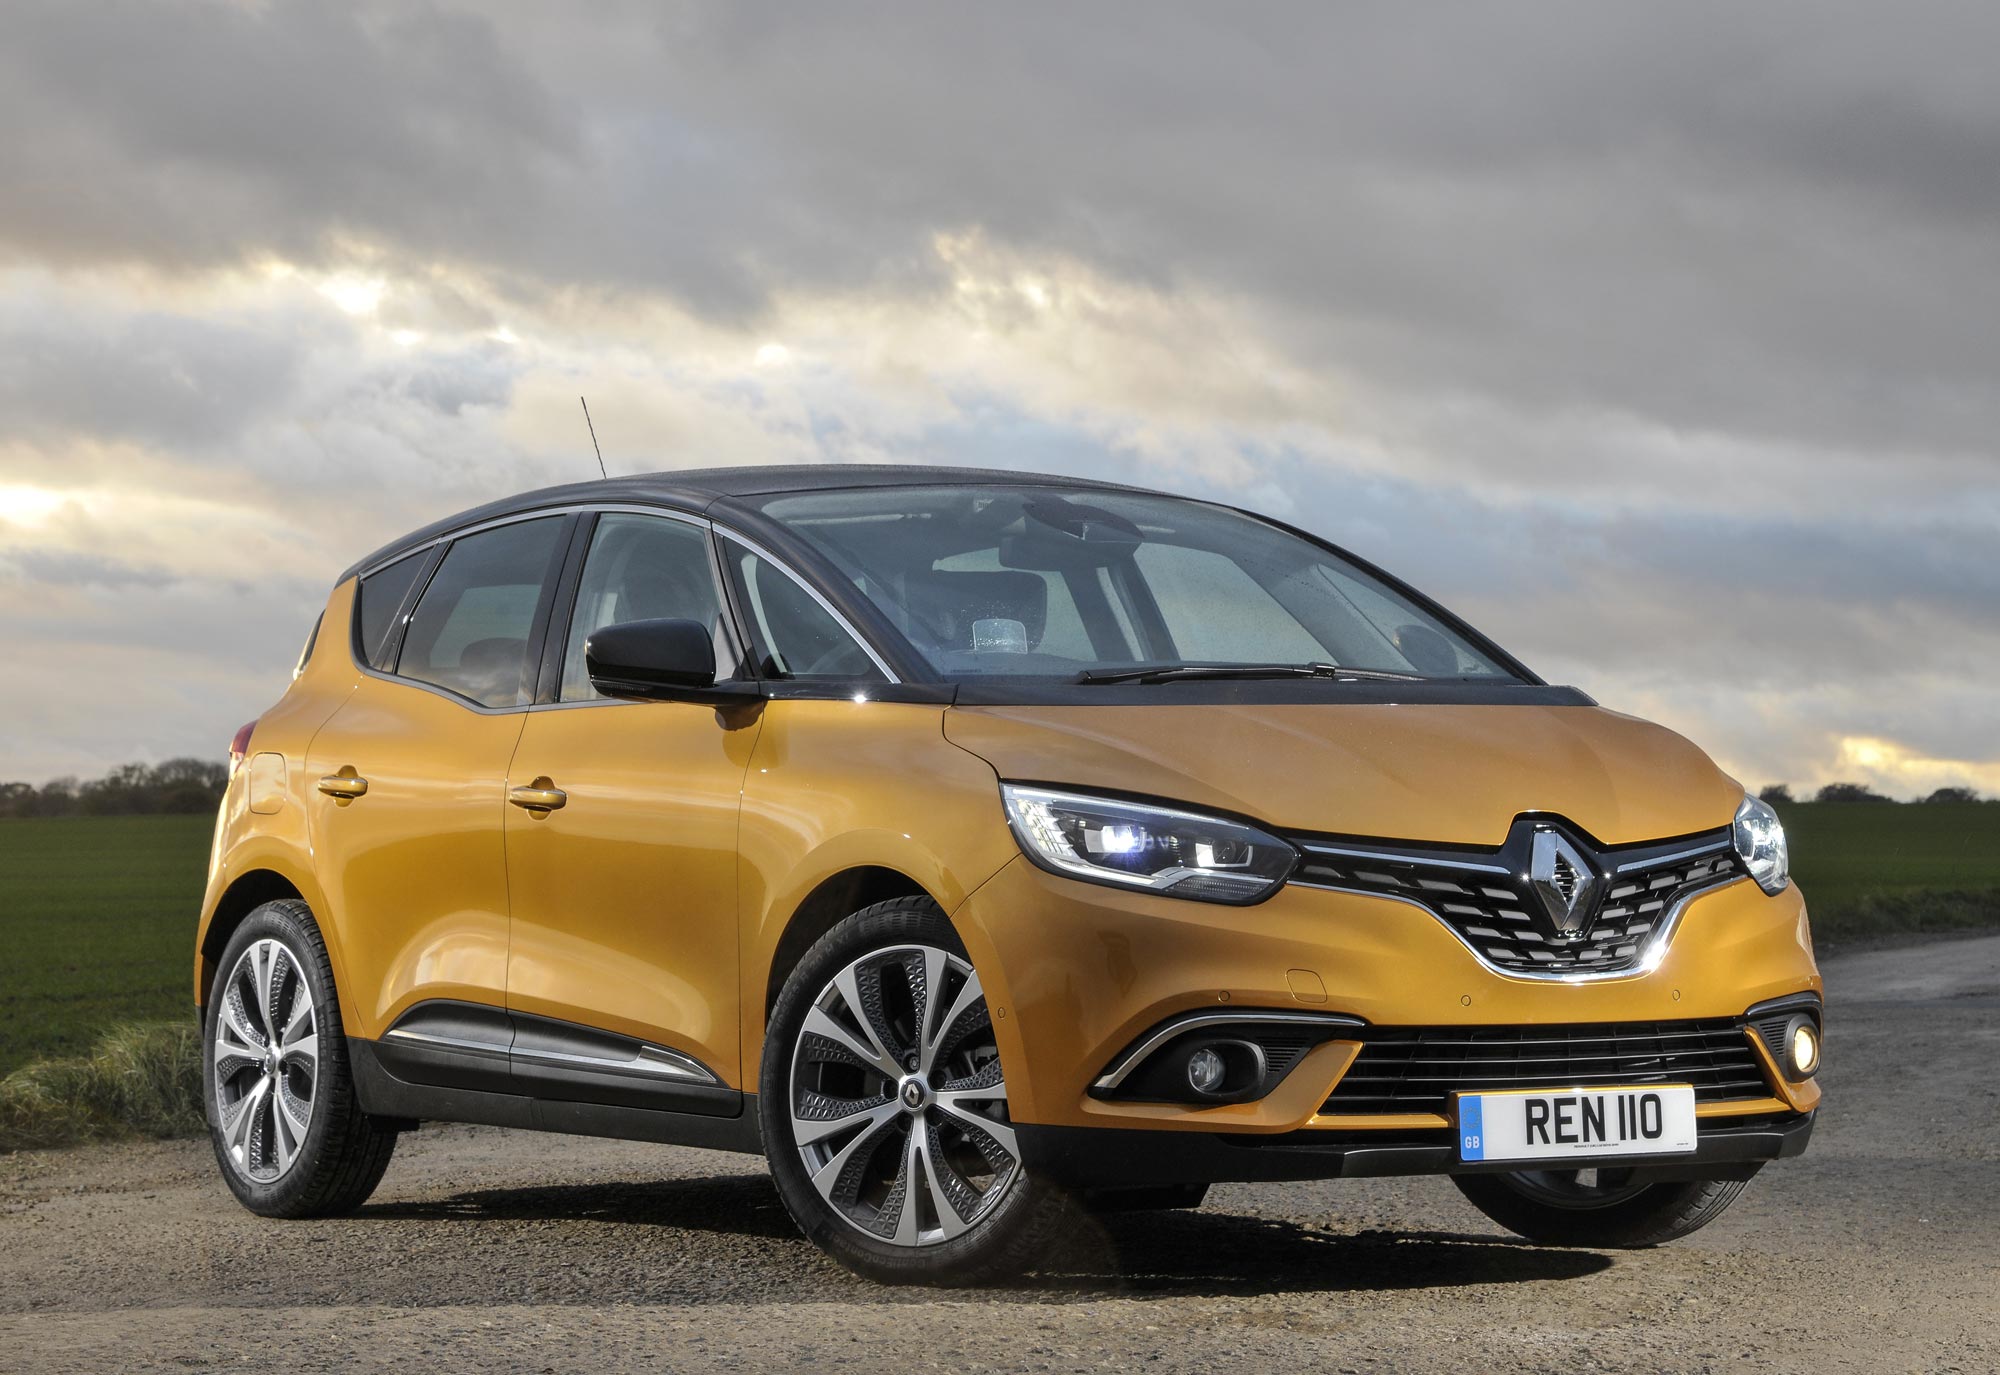 All-New-Renault-Scénic-Dynamique-S-dCi-110-(11).jpg